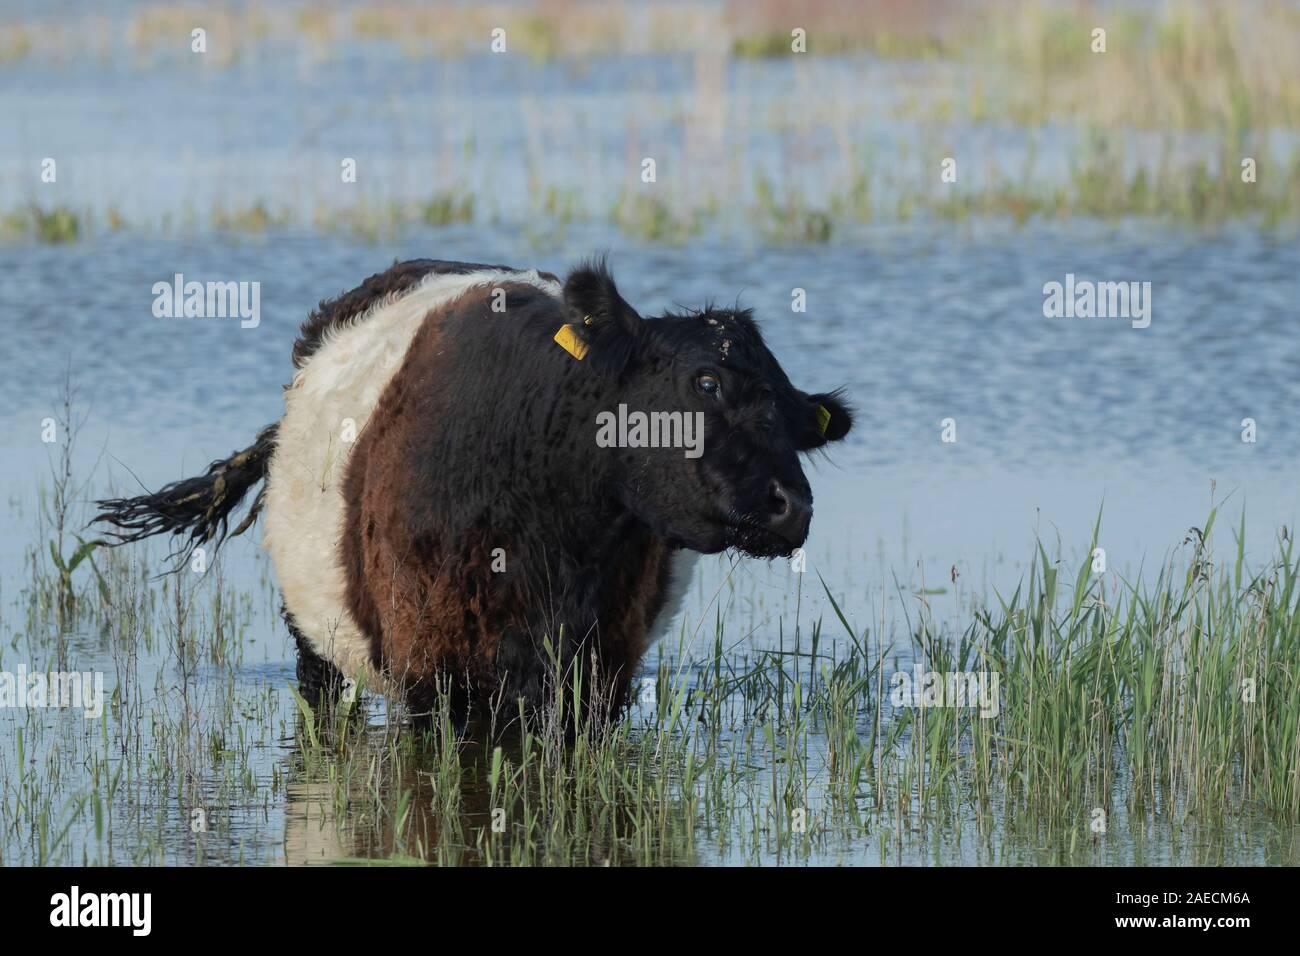 Cow (Bos taurus) standing in a shallow lake, Lincolnshire, England, United Kingdom Stock Photo